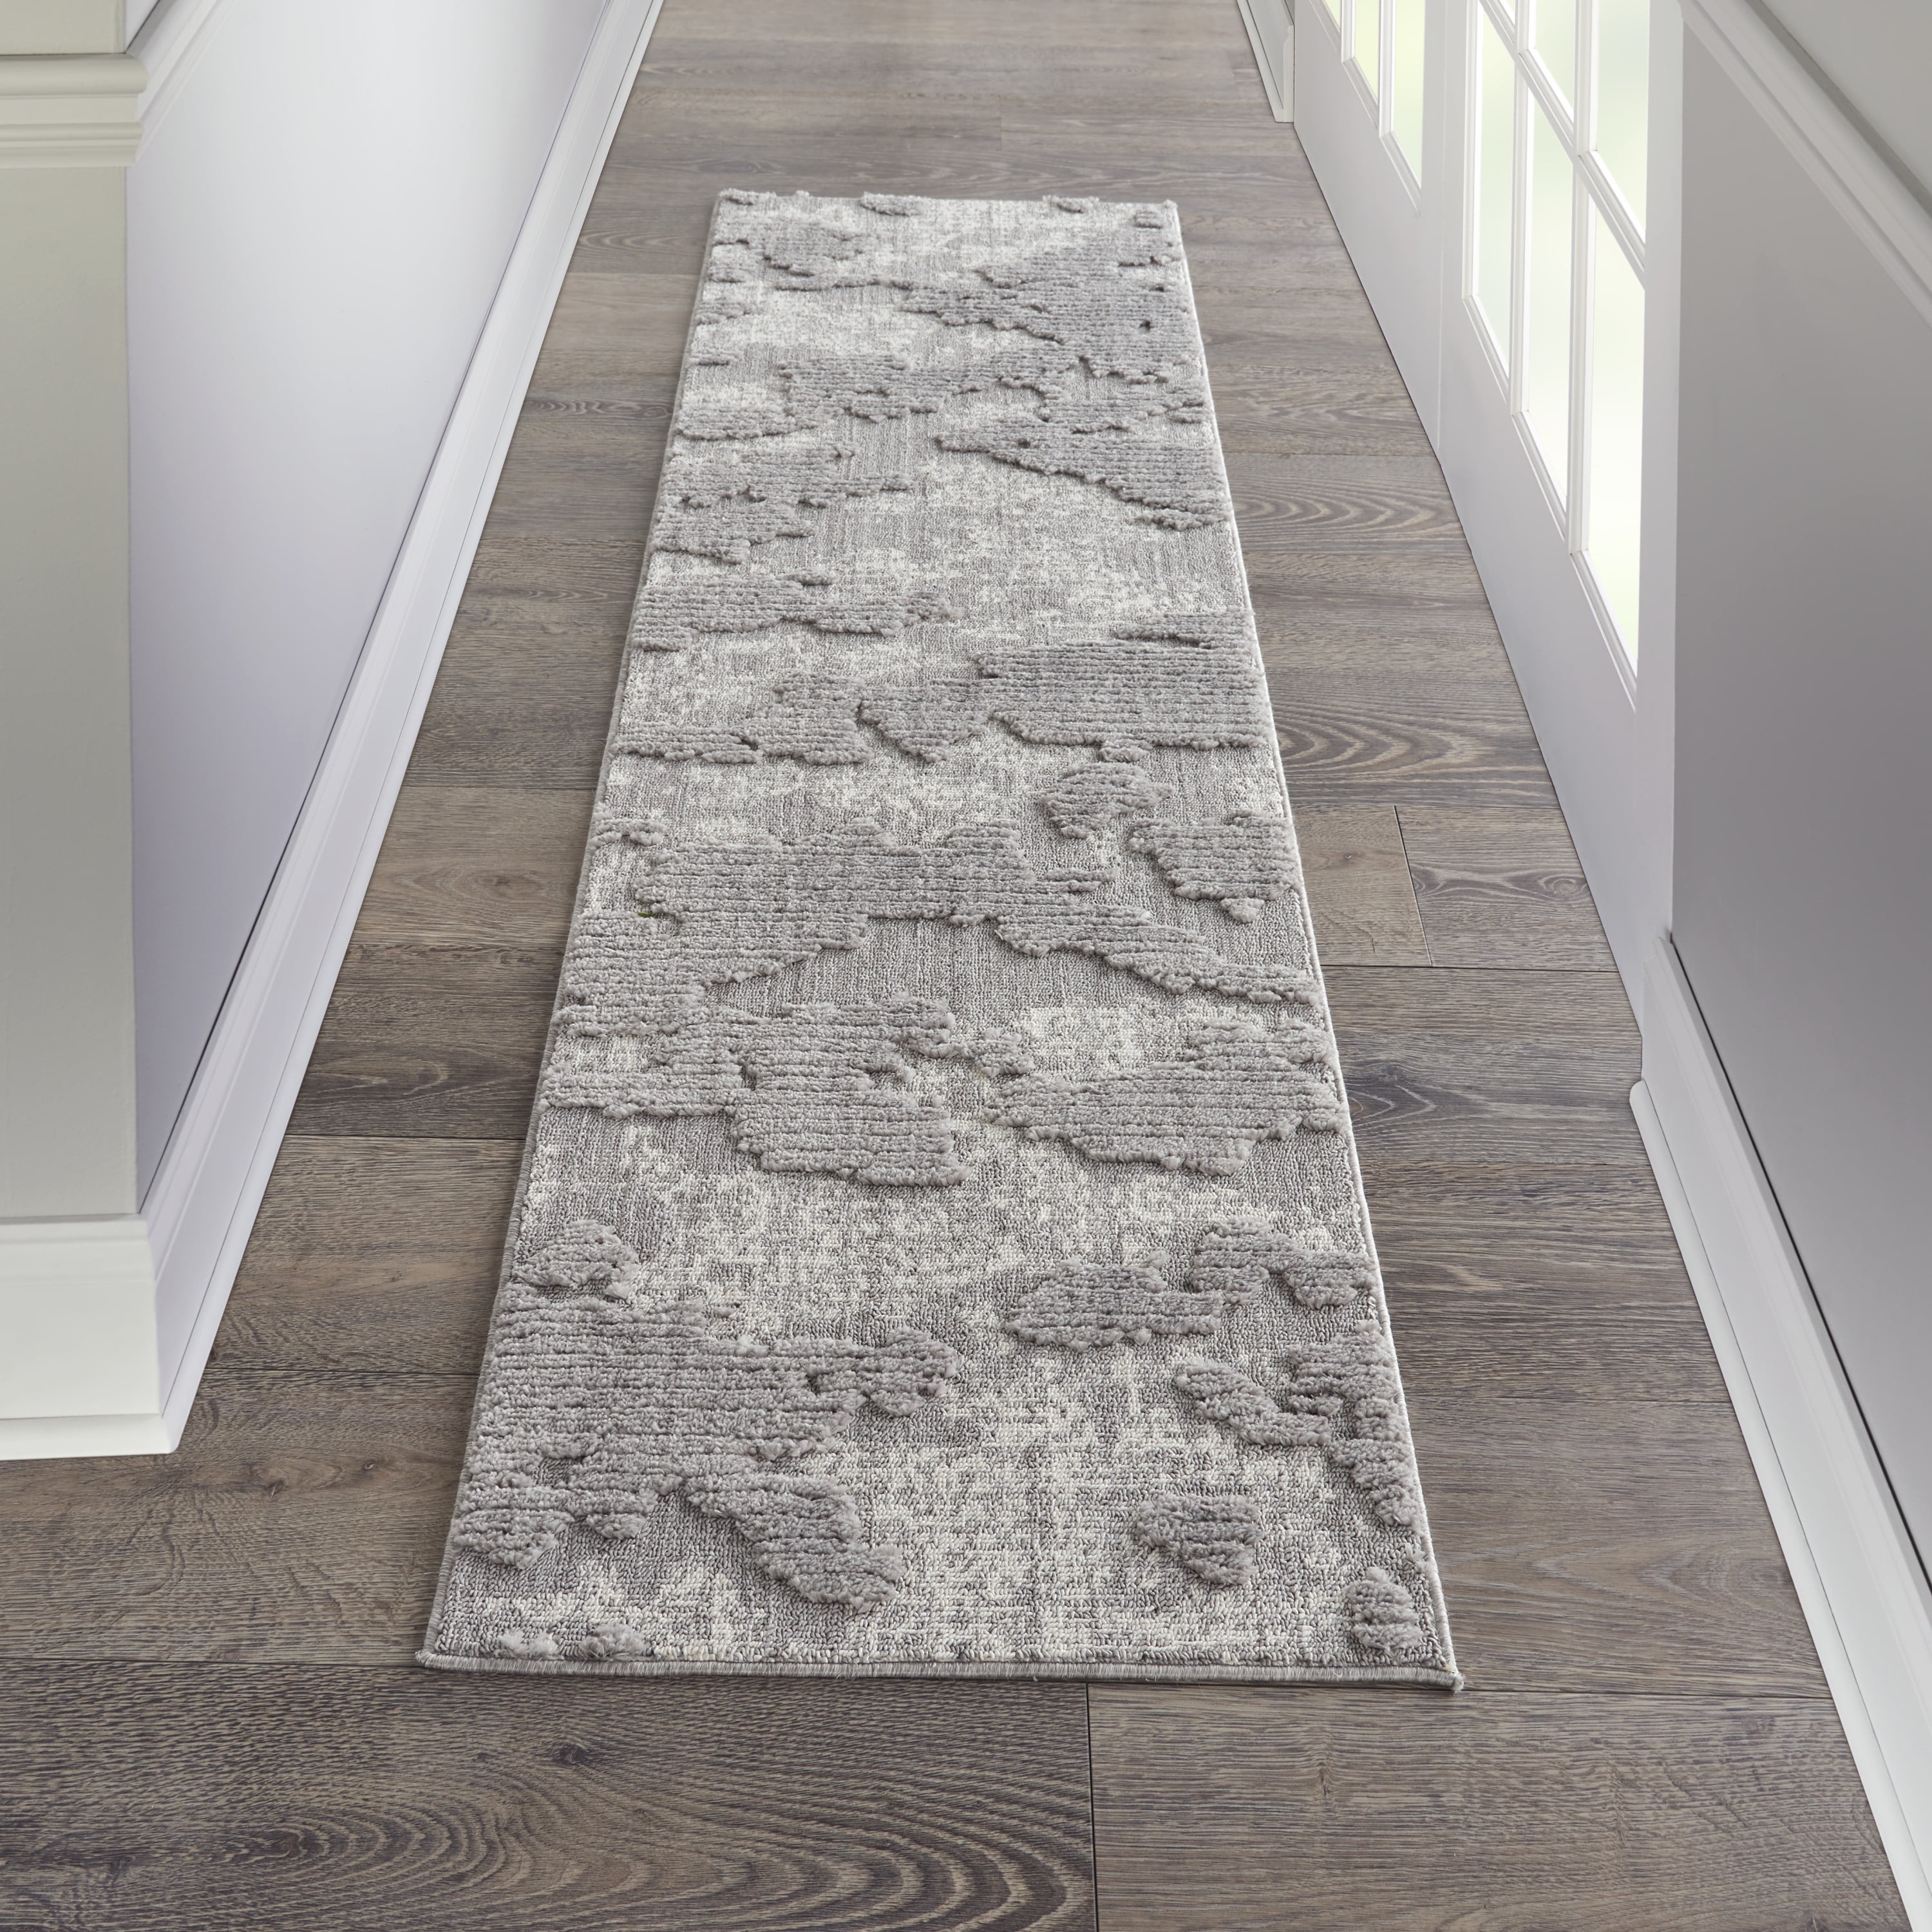  Abani Ivory Area Rug with Contemporary Tonal Grey Border Rugs -  Unique Modern 7'9 x 10'2 (8'x10') Under Table Dining Room Rug : Home &  Kitchen